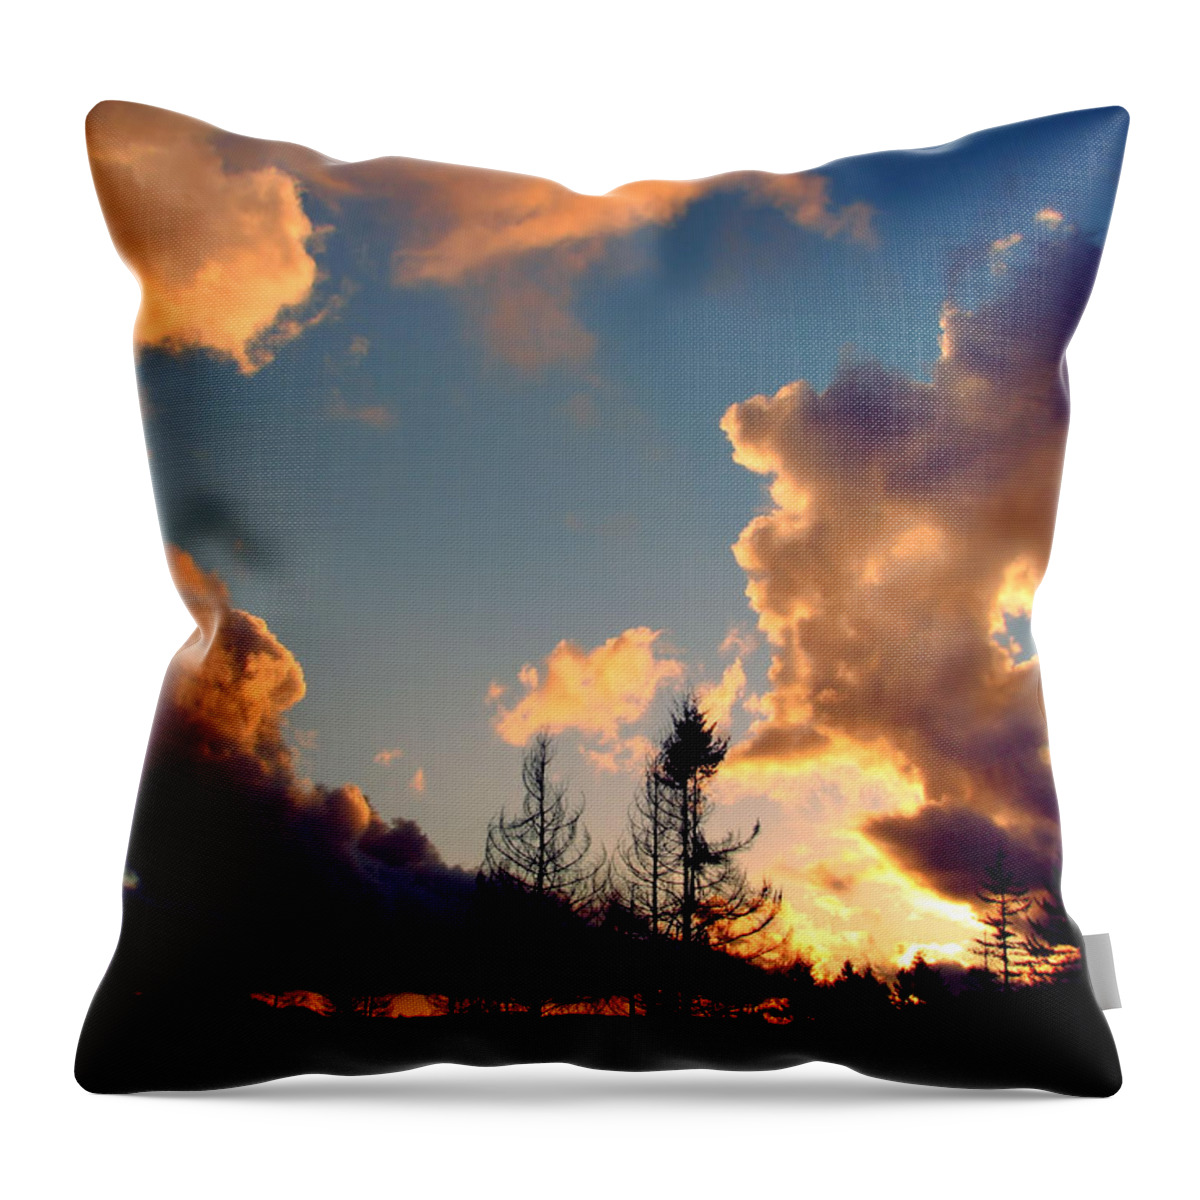 Landscape Throw Pillow featuring the photograph All Kinds Of Weather by Rory Siegel